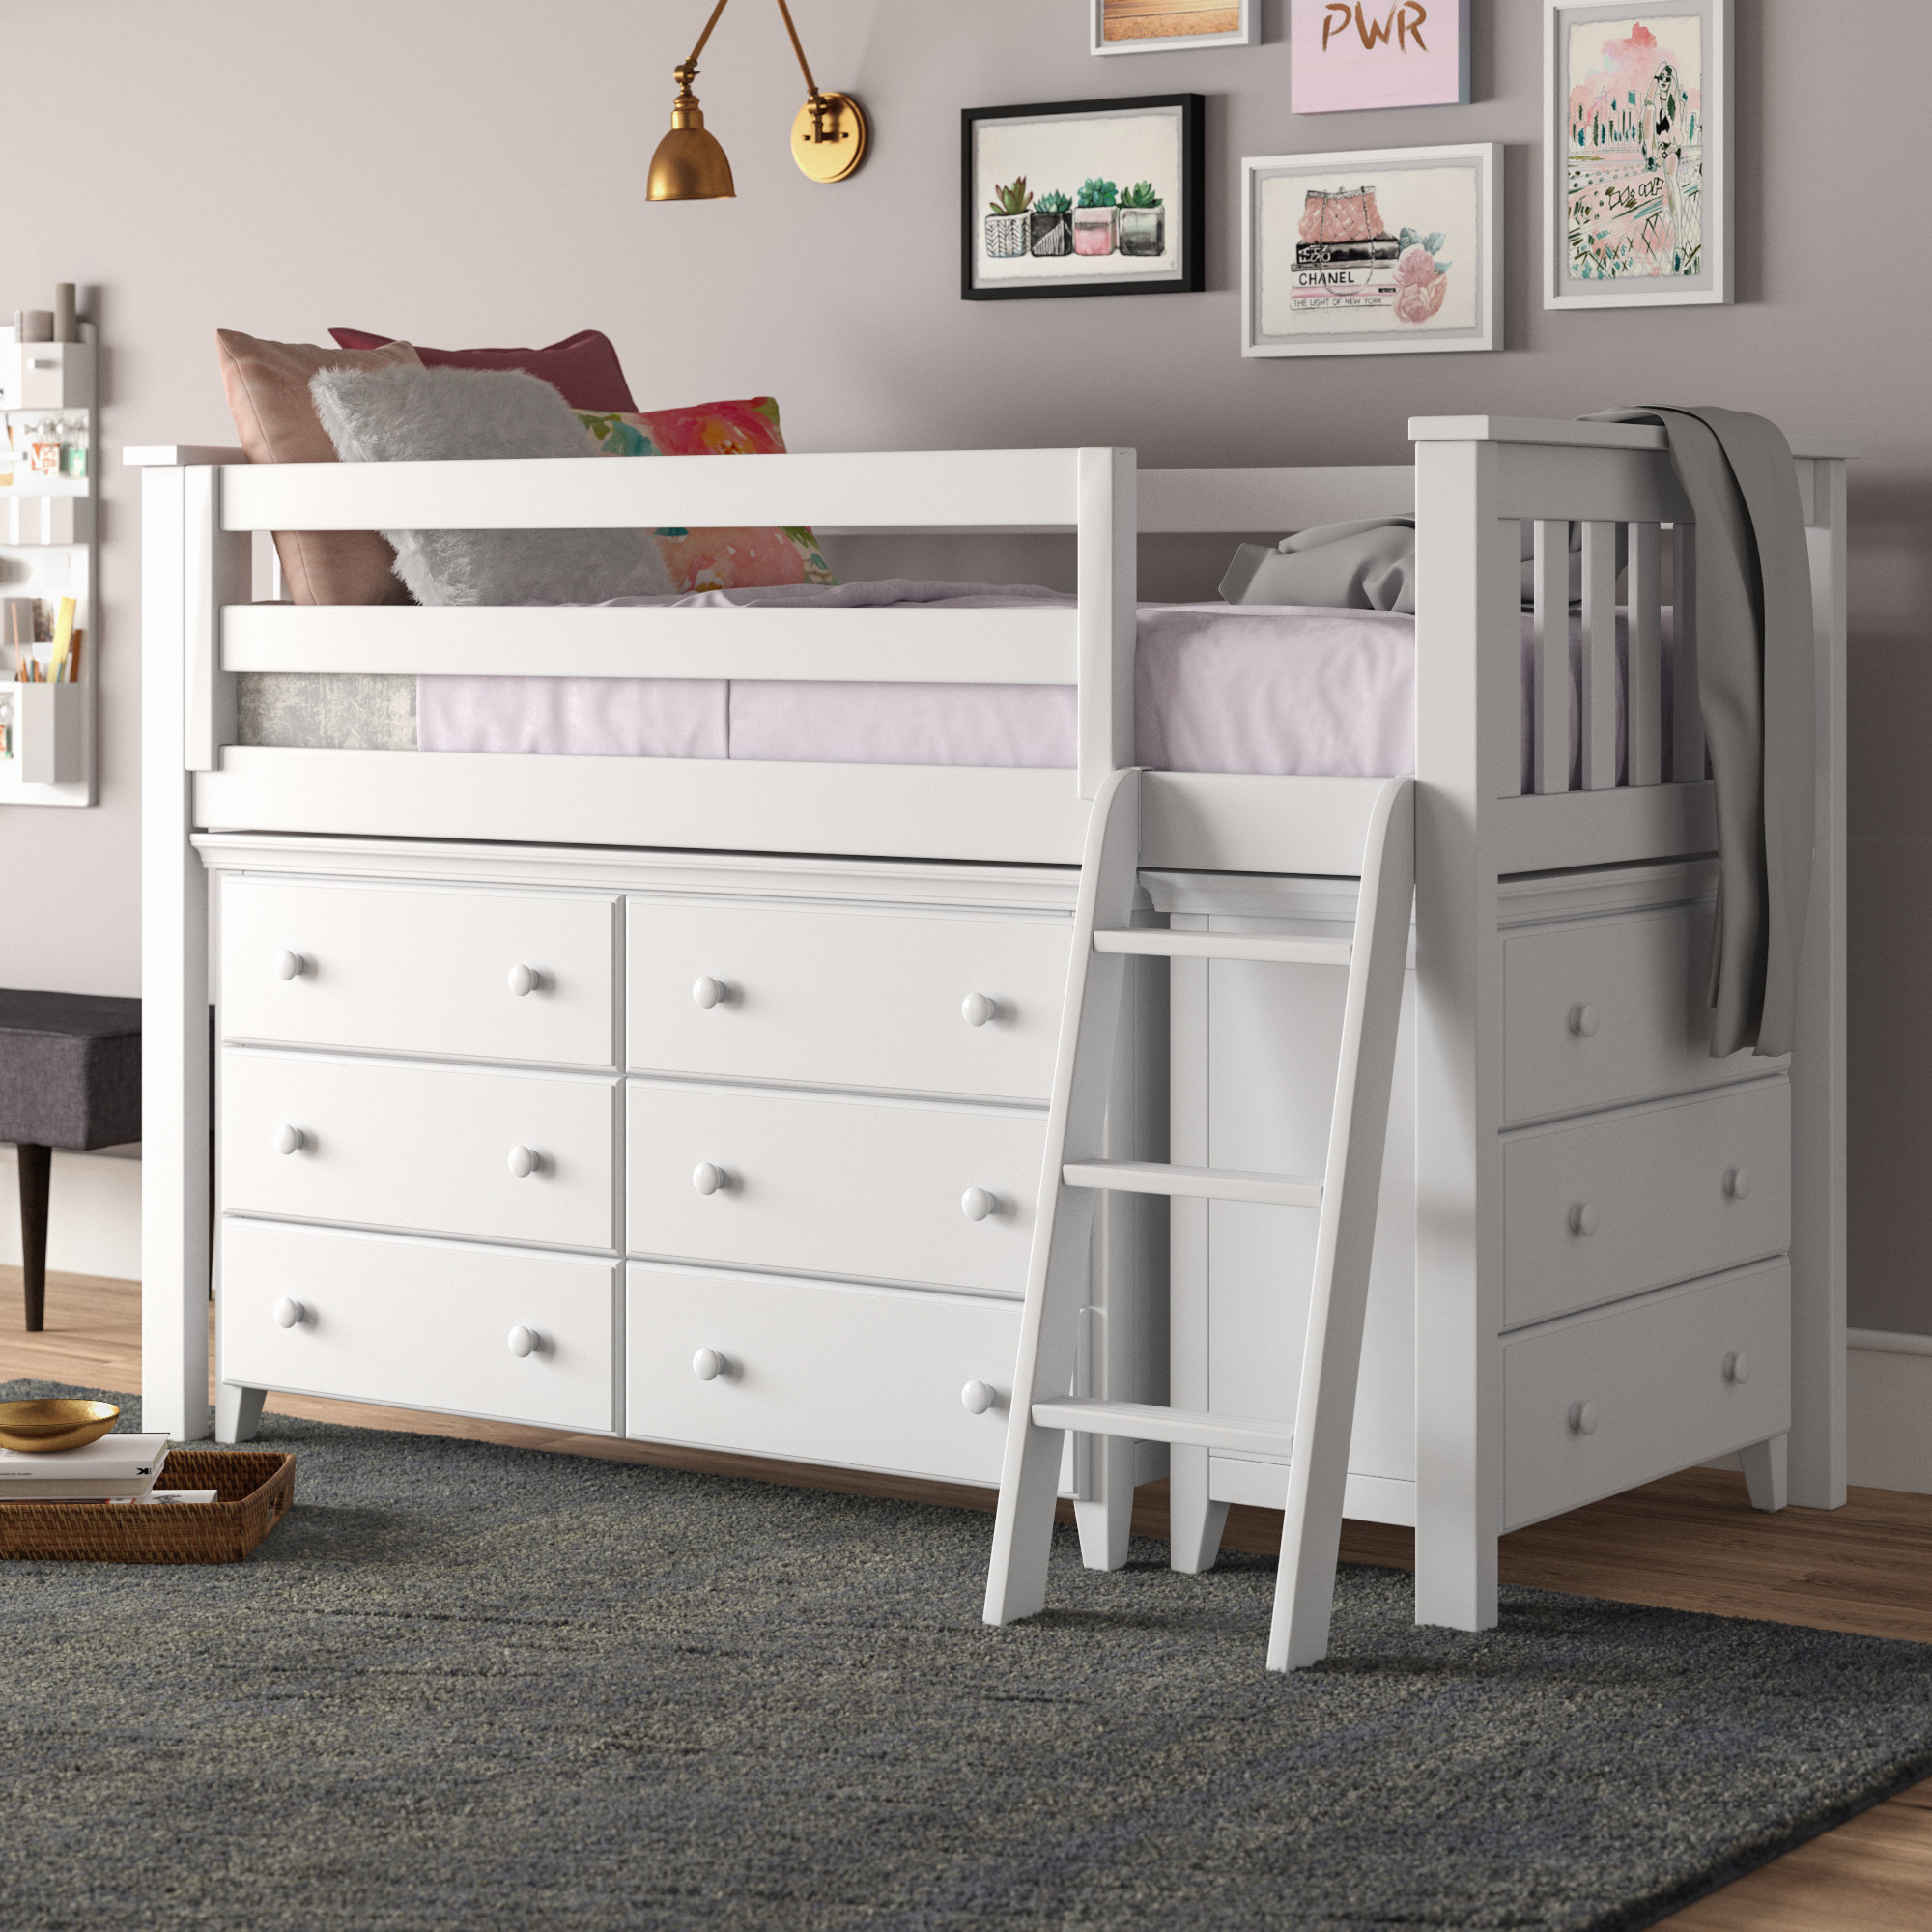 Sand & Stable Baby & Kids Alisi Twin Solid Wood Loft Bed by Sand & Stable™  Baby & Kids & Reviews | Wayfair